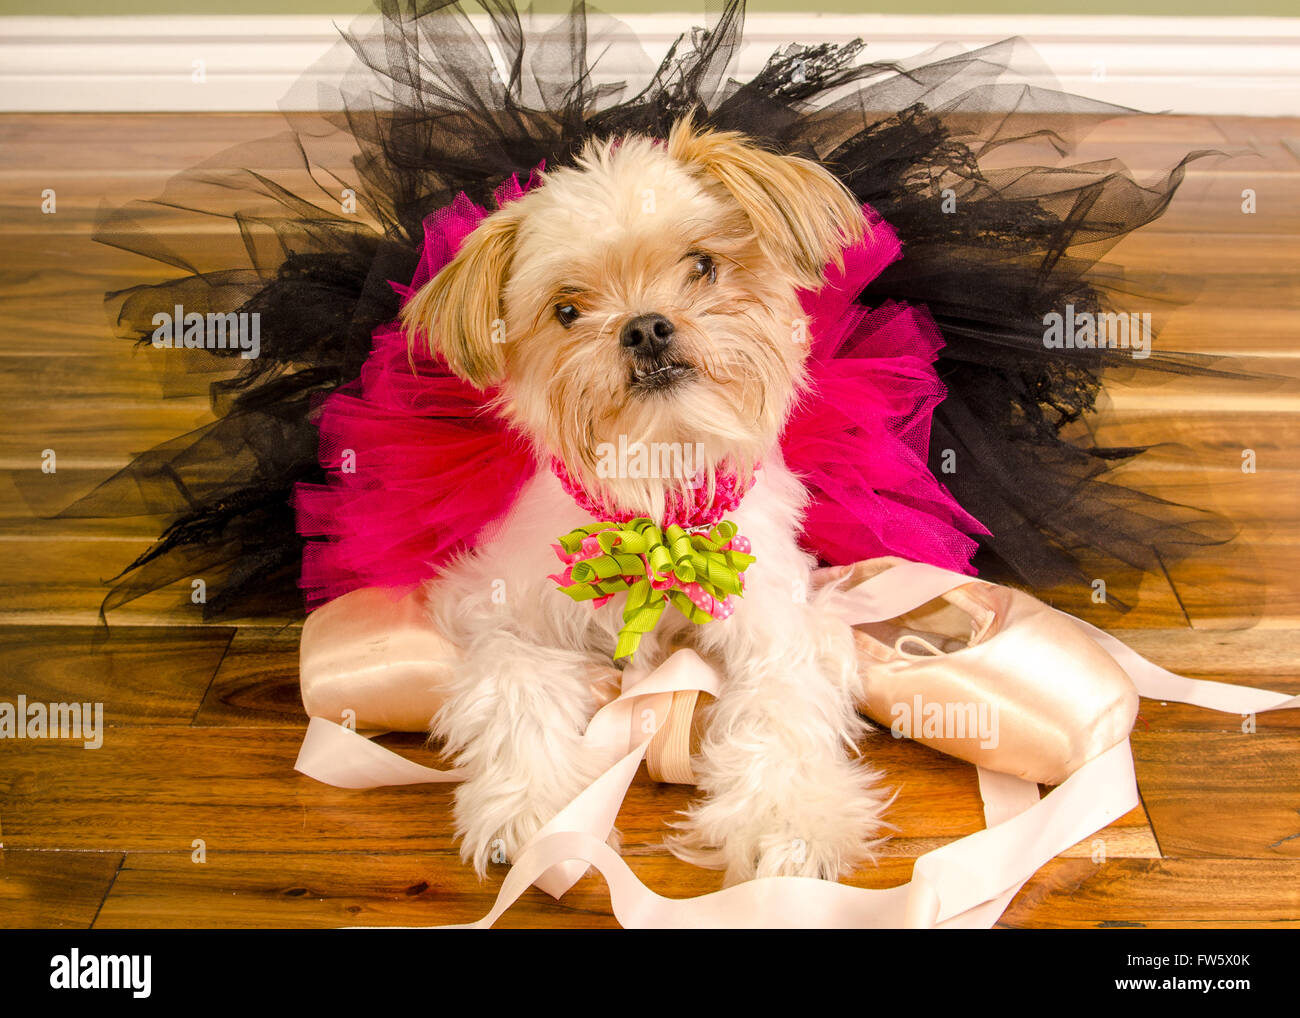 Small Chihuahua Pomeranian Mixed Dog poses in Pink Ballet Tutu on Pointe Shoes Stock Photo